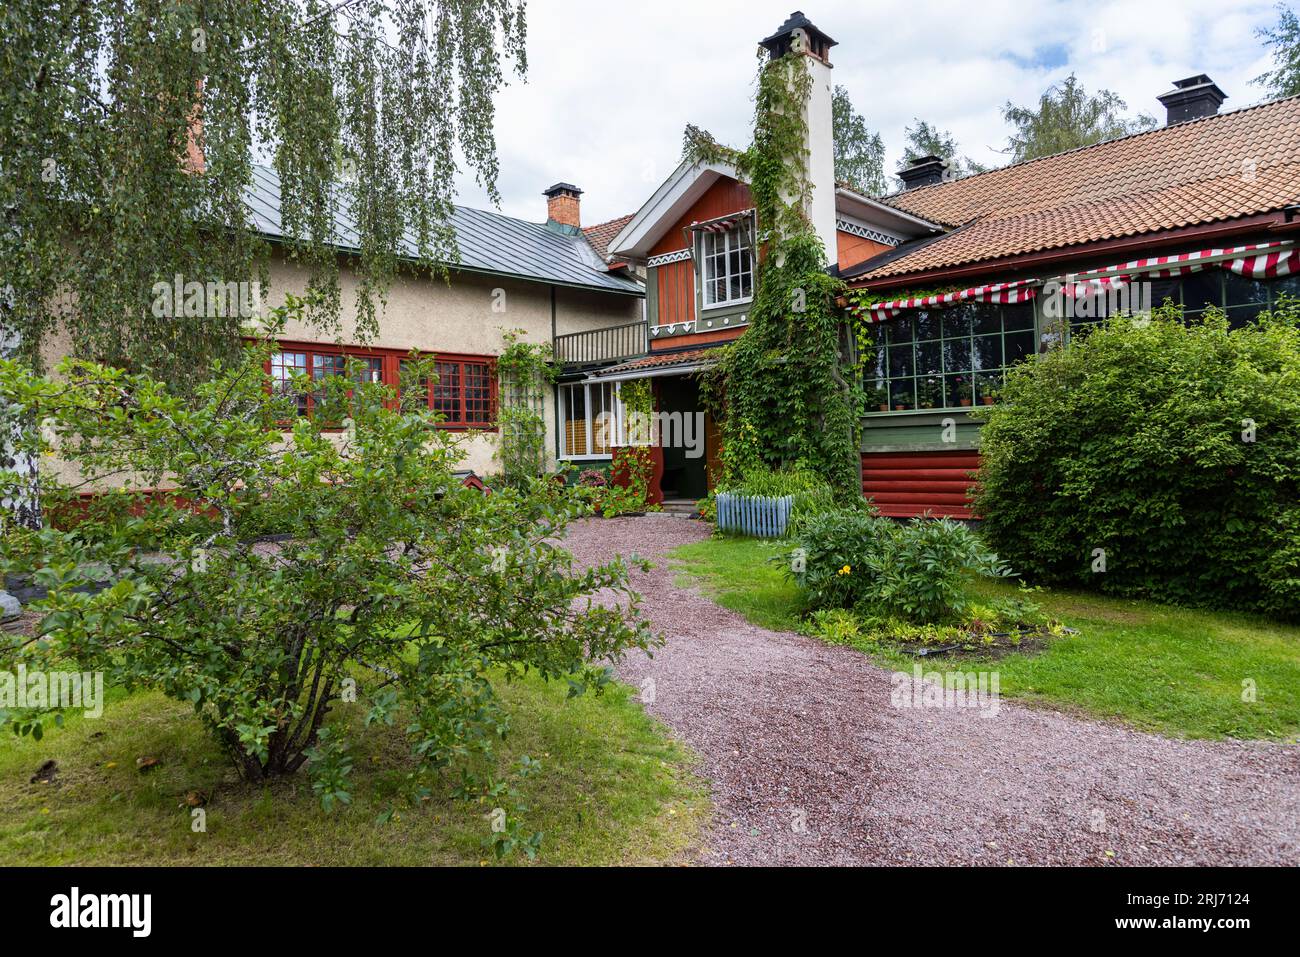 The Carl Larsson house in Sundborn, Dalarna County, Sweden. Sundborn is a locality situated in Falun Municipality, Dalarna County. The most famous resident was the painter Carl Larsson and his house (Little Hyttnäs) in Sundborn is a popular tourist attraction. Stock Photo